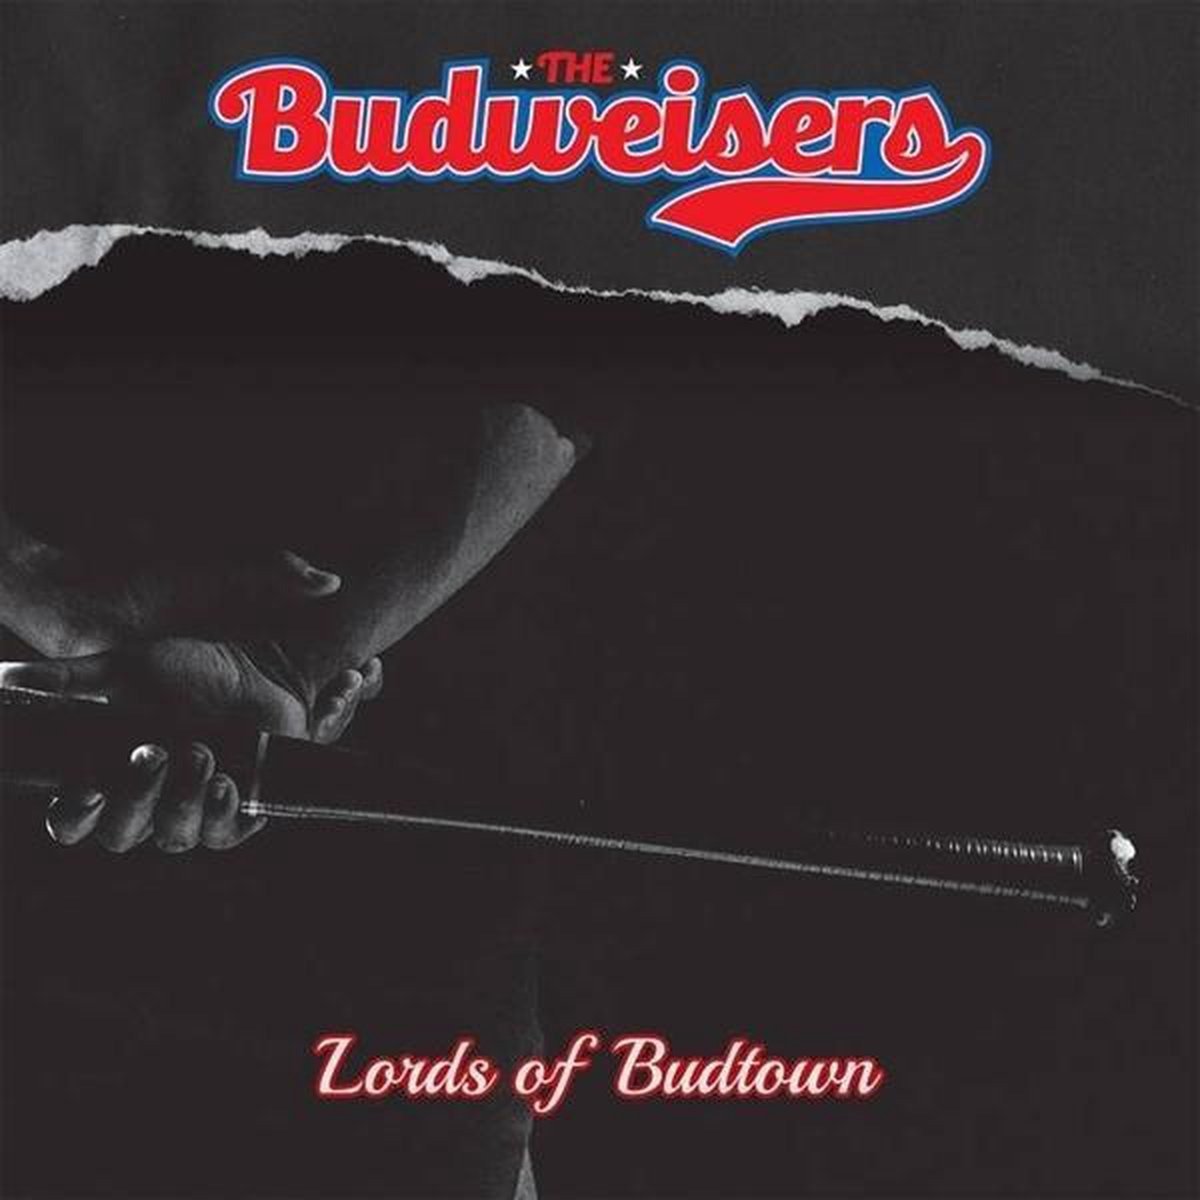 CD Shop - BUDWEISERS LORDS OF BUDTOWN